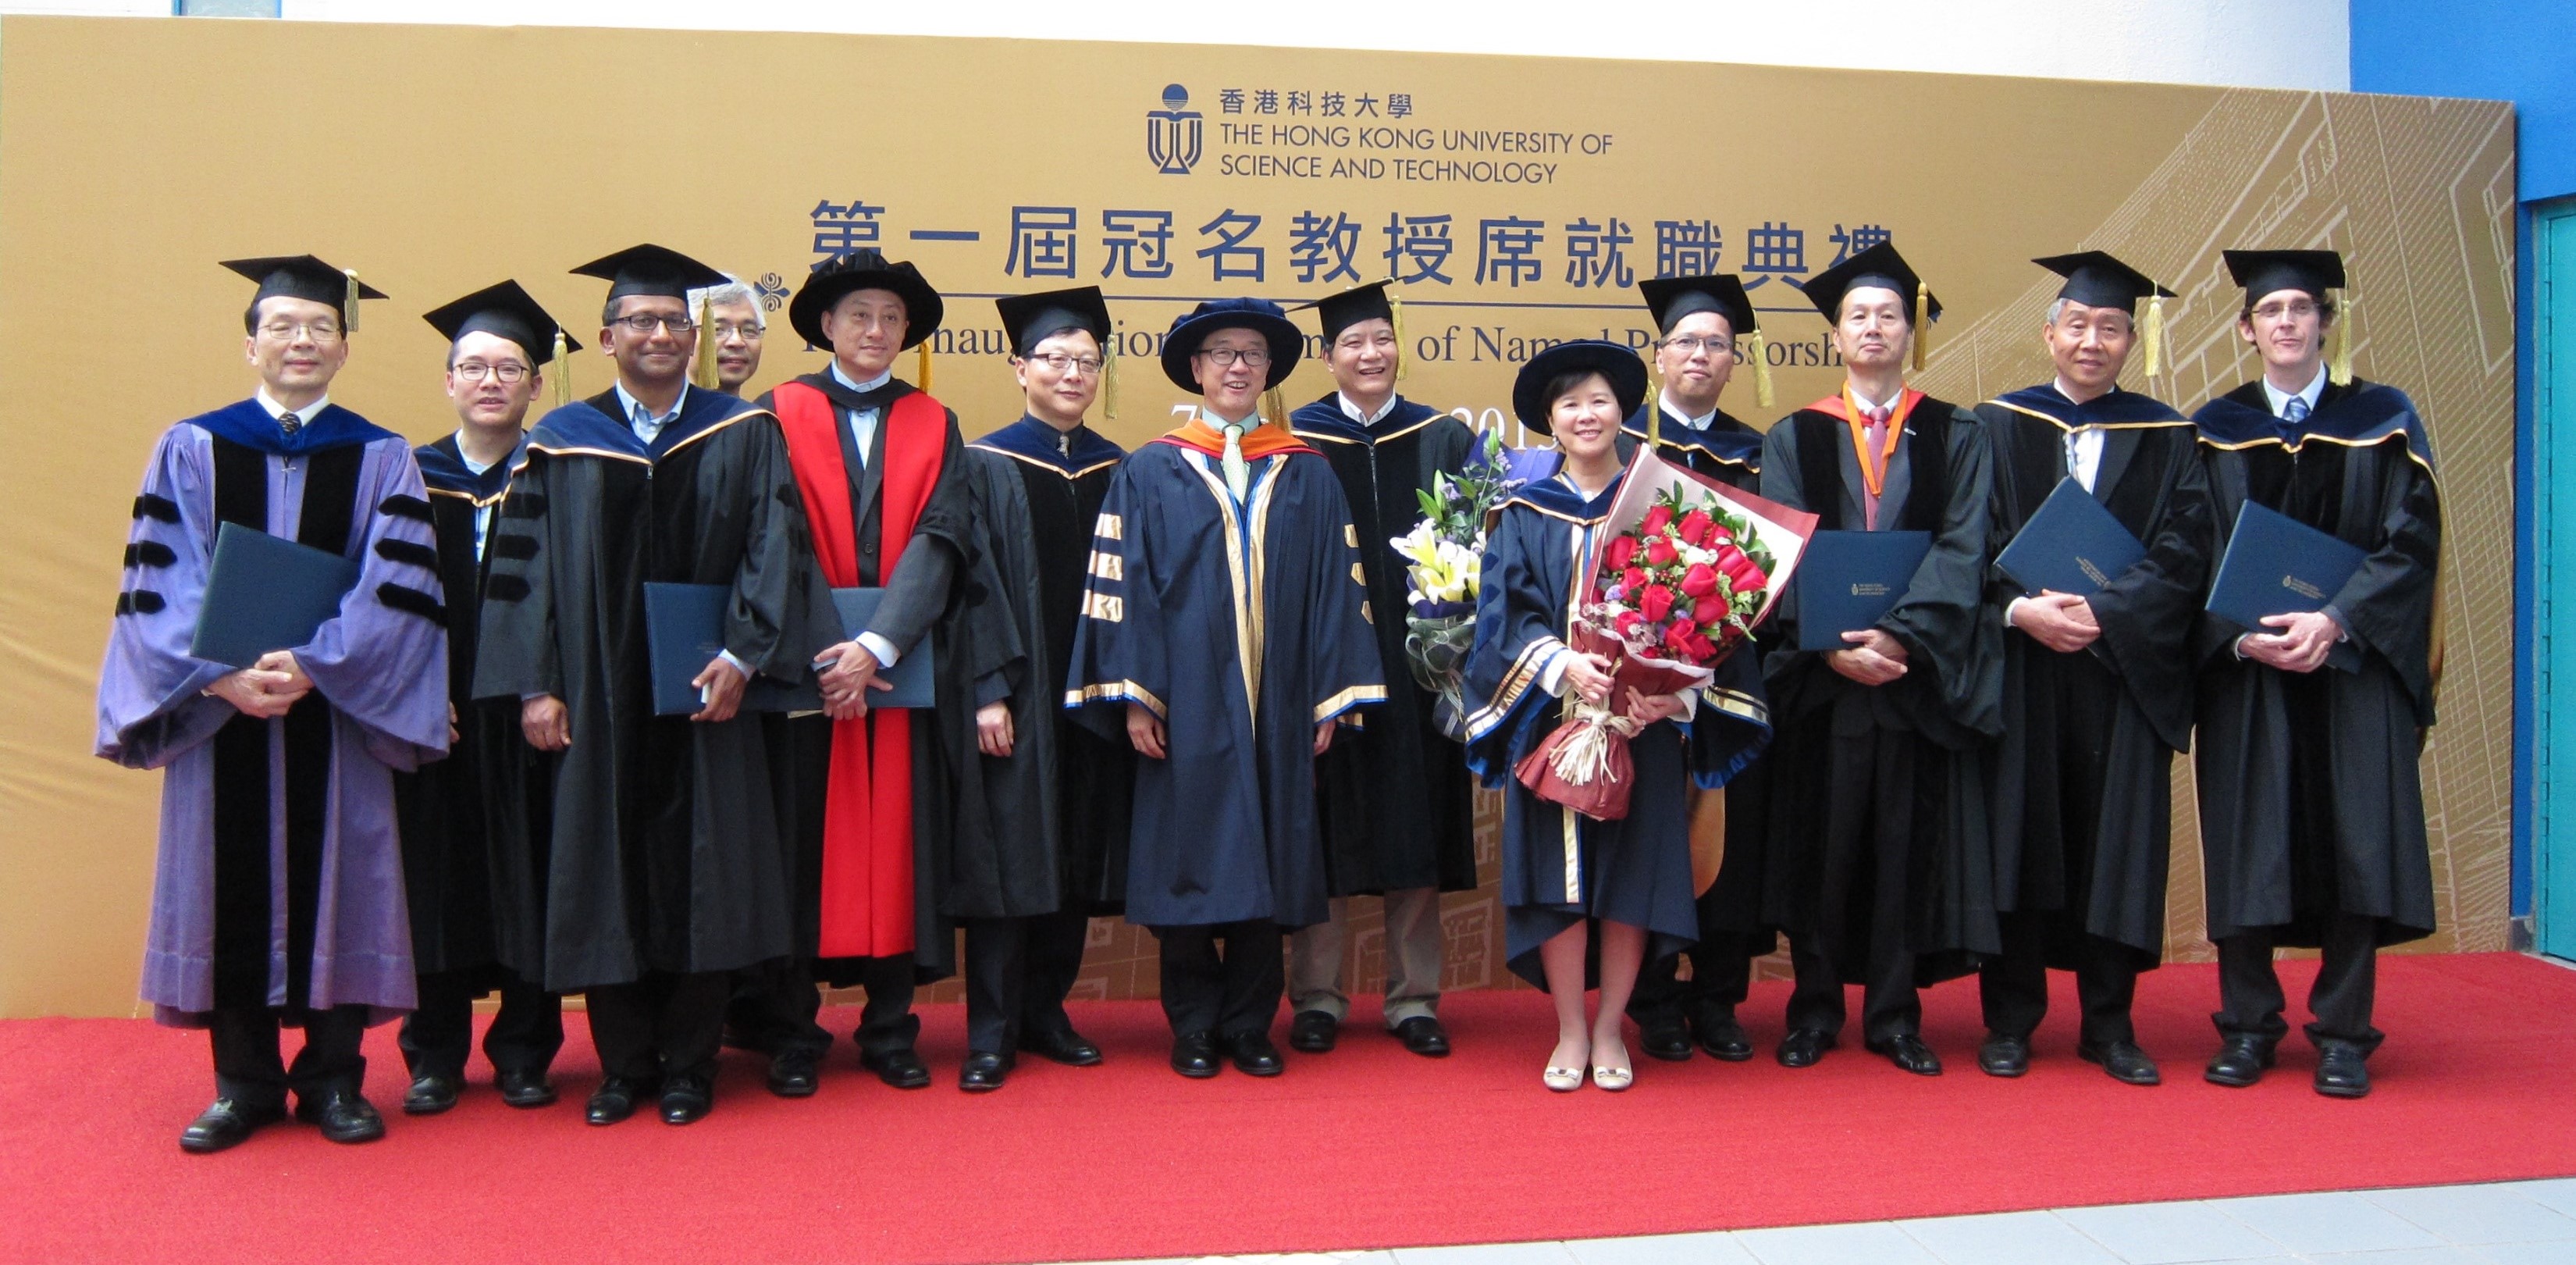 Prof. Ip (Fifth right) was named The Morningside Professor of Life Science at HKUST’s inaugural Named Professorship Ceremony in 2013.